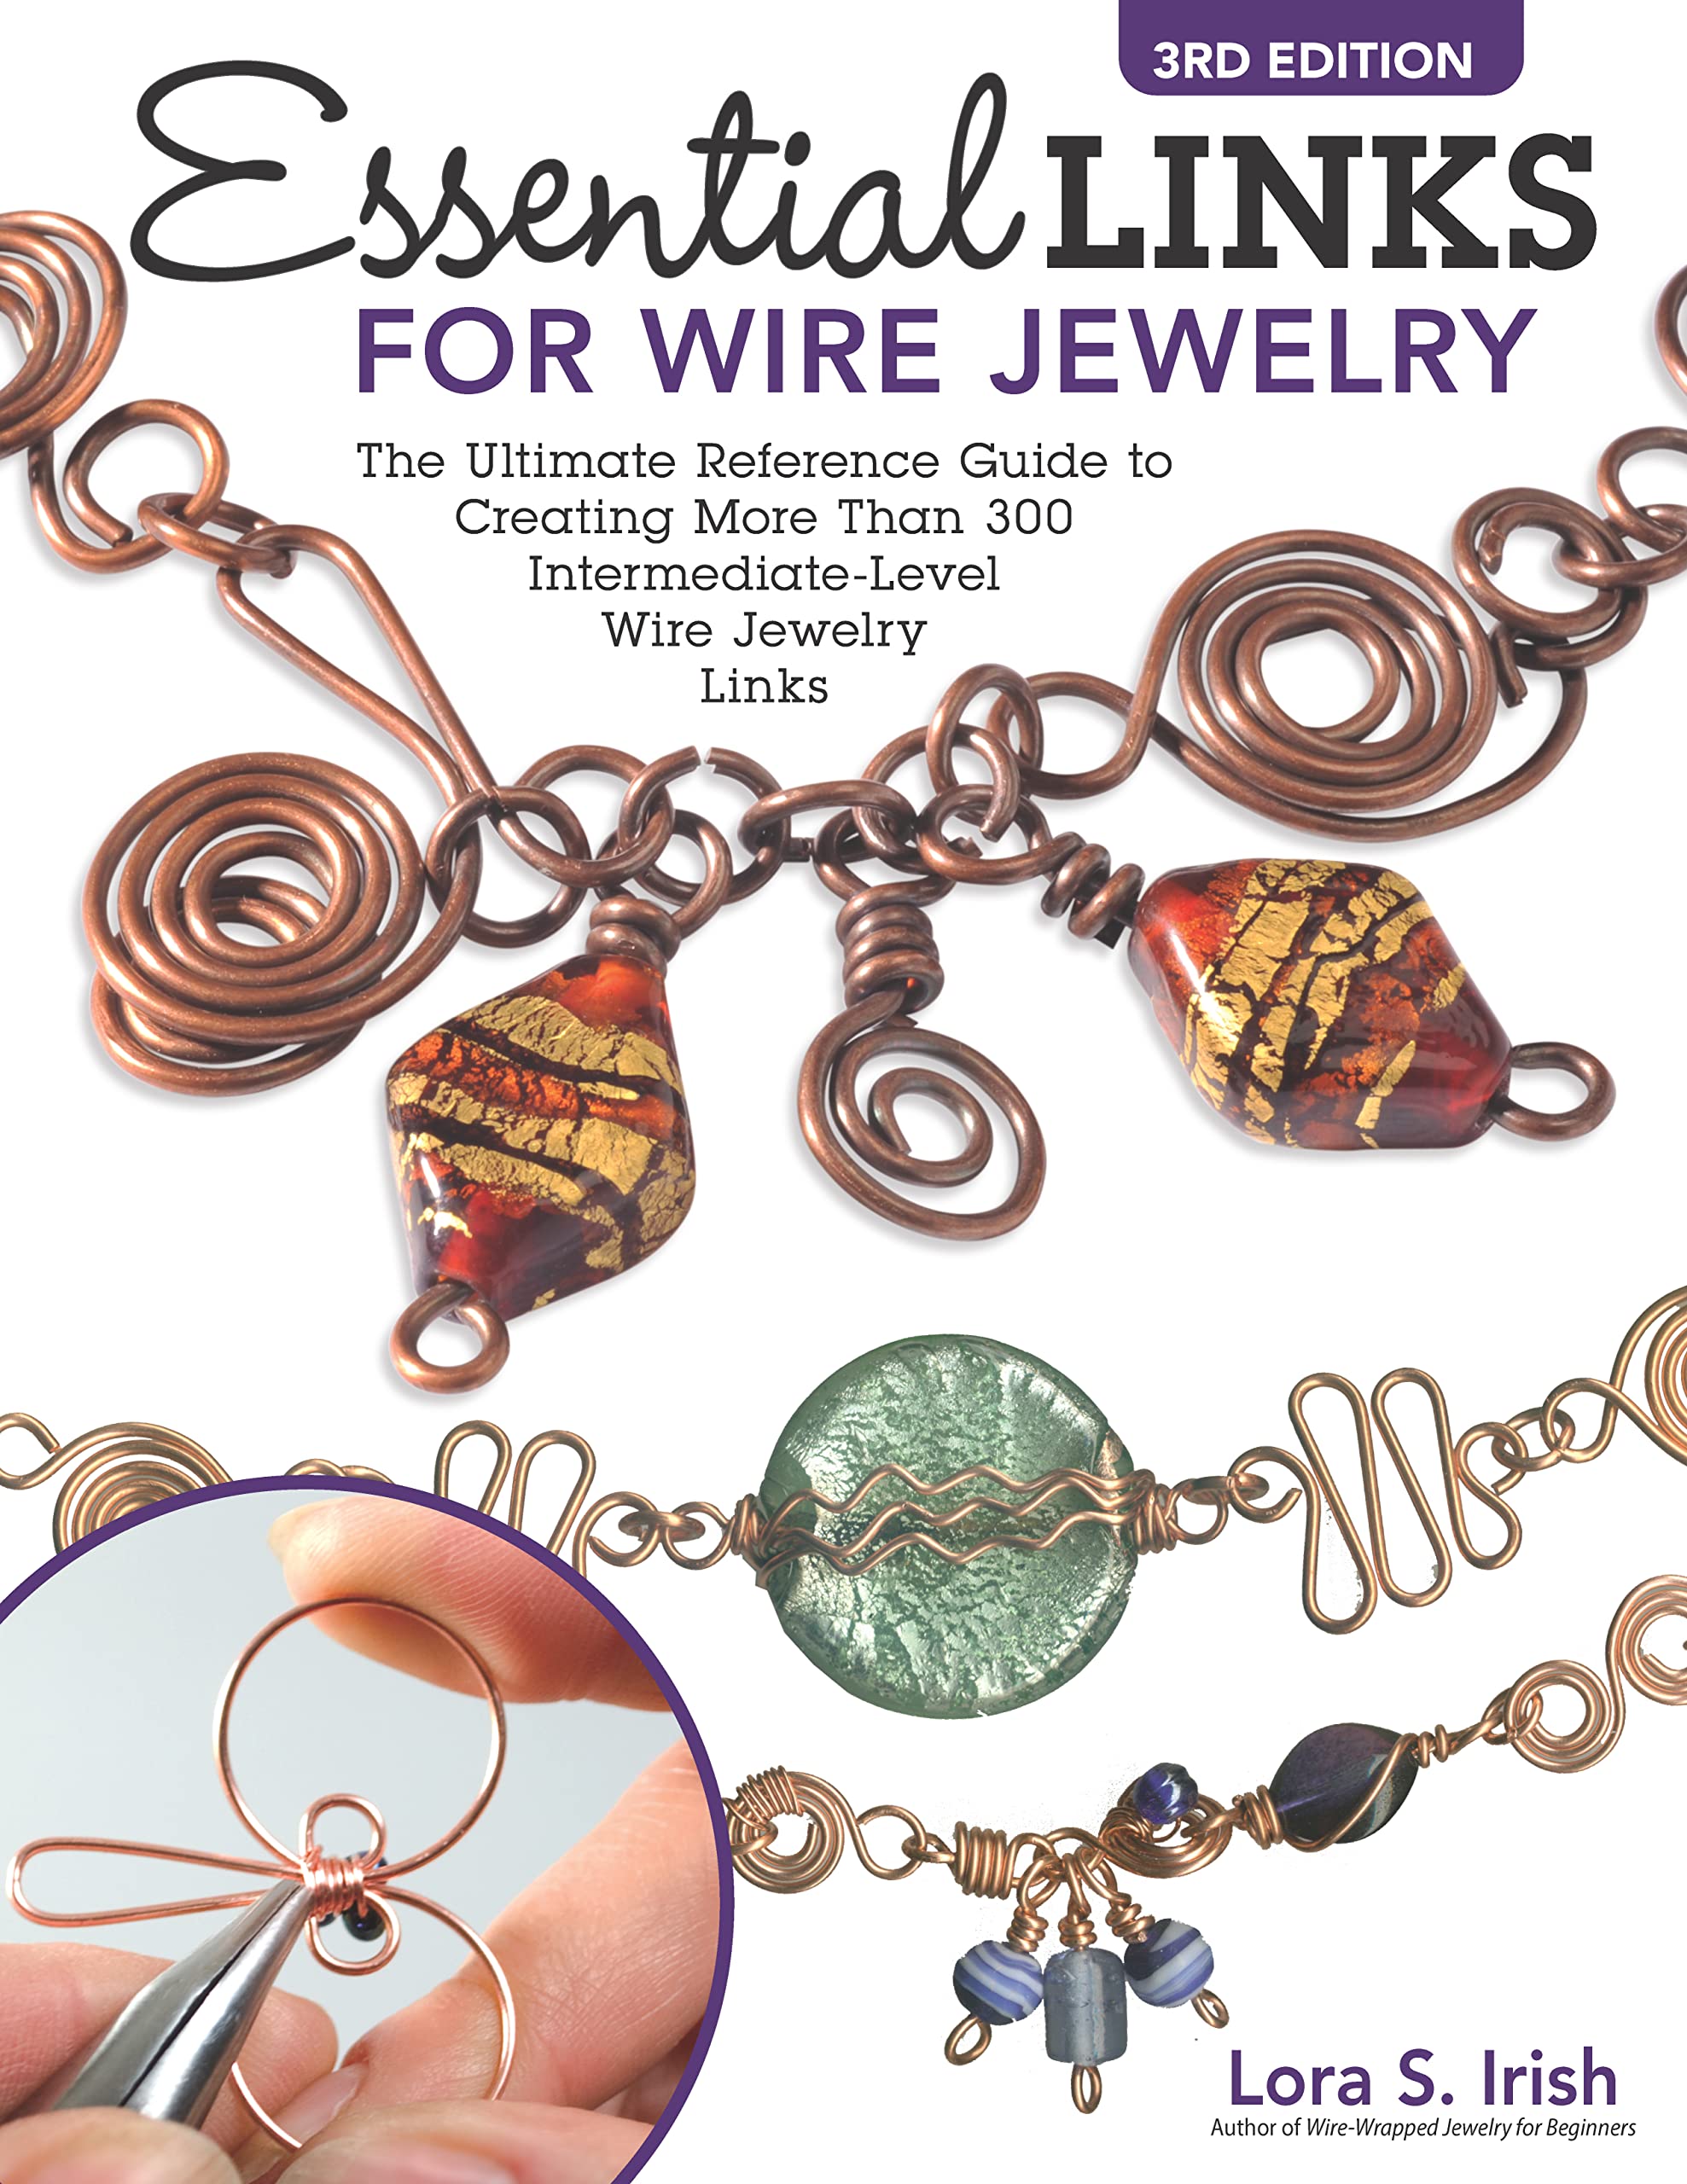 Essential Links for Wire Jewelry, 3rd Edition: The Ultimate Reference Guide to Creating More Than 300 Intermediate-Level Wire Jewelry Links (Fox Chapel Publishing) 14 Projects and Step-by-Step